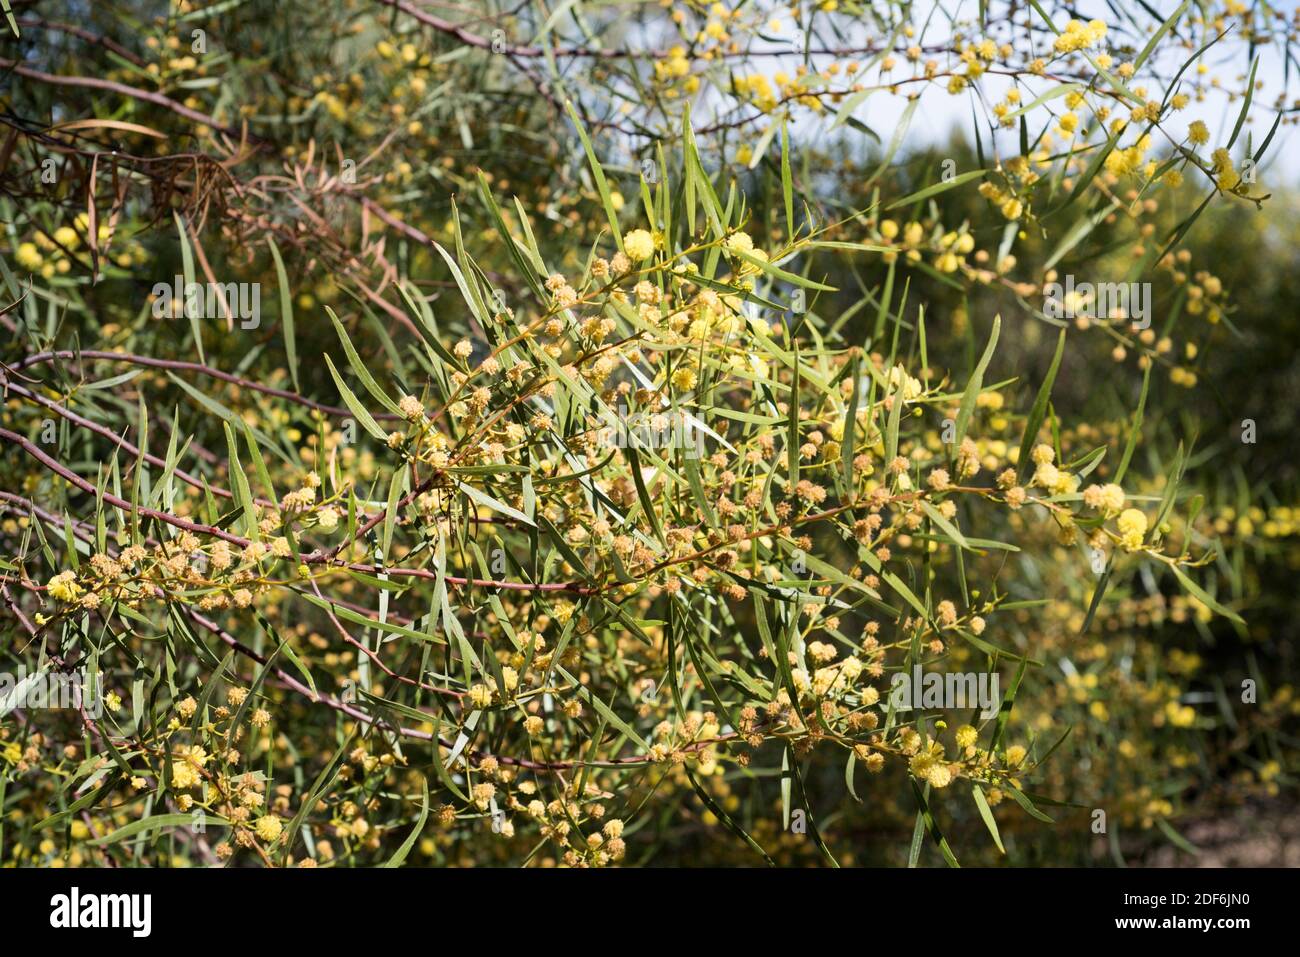 Sticky wattle or hop leaved wattle (Acacia dodonaeifolia) is a shrub native to Australia. Flowers and leaves (phyllodes) detail. Stock Photo